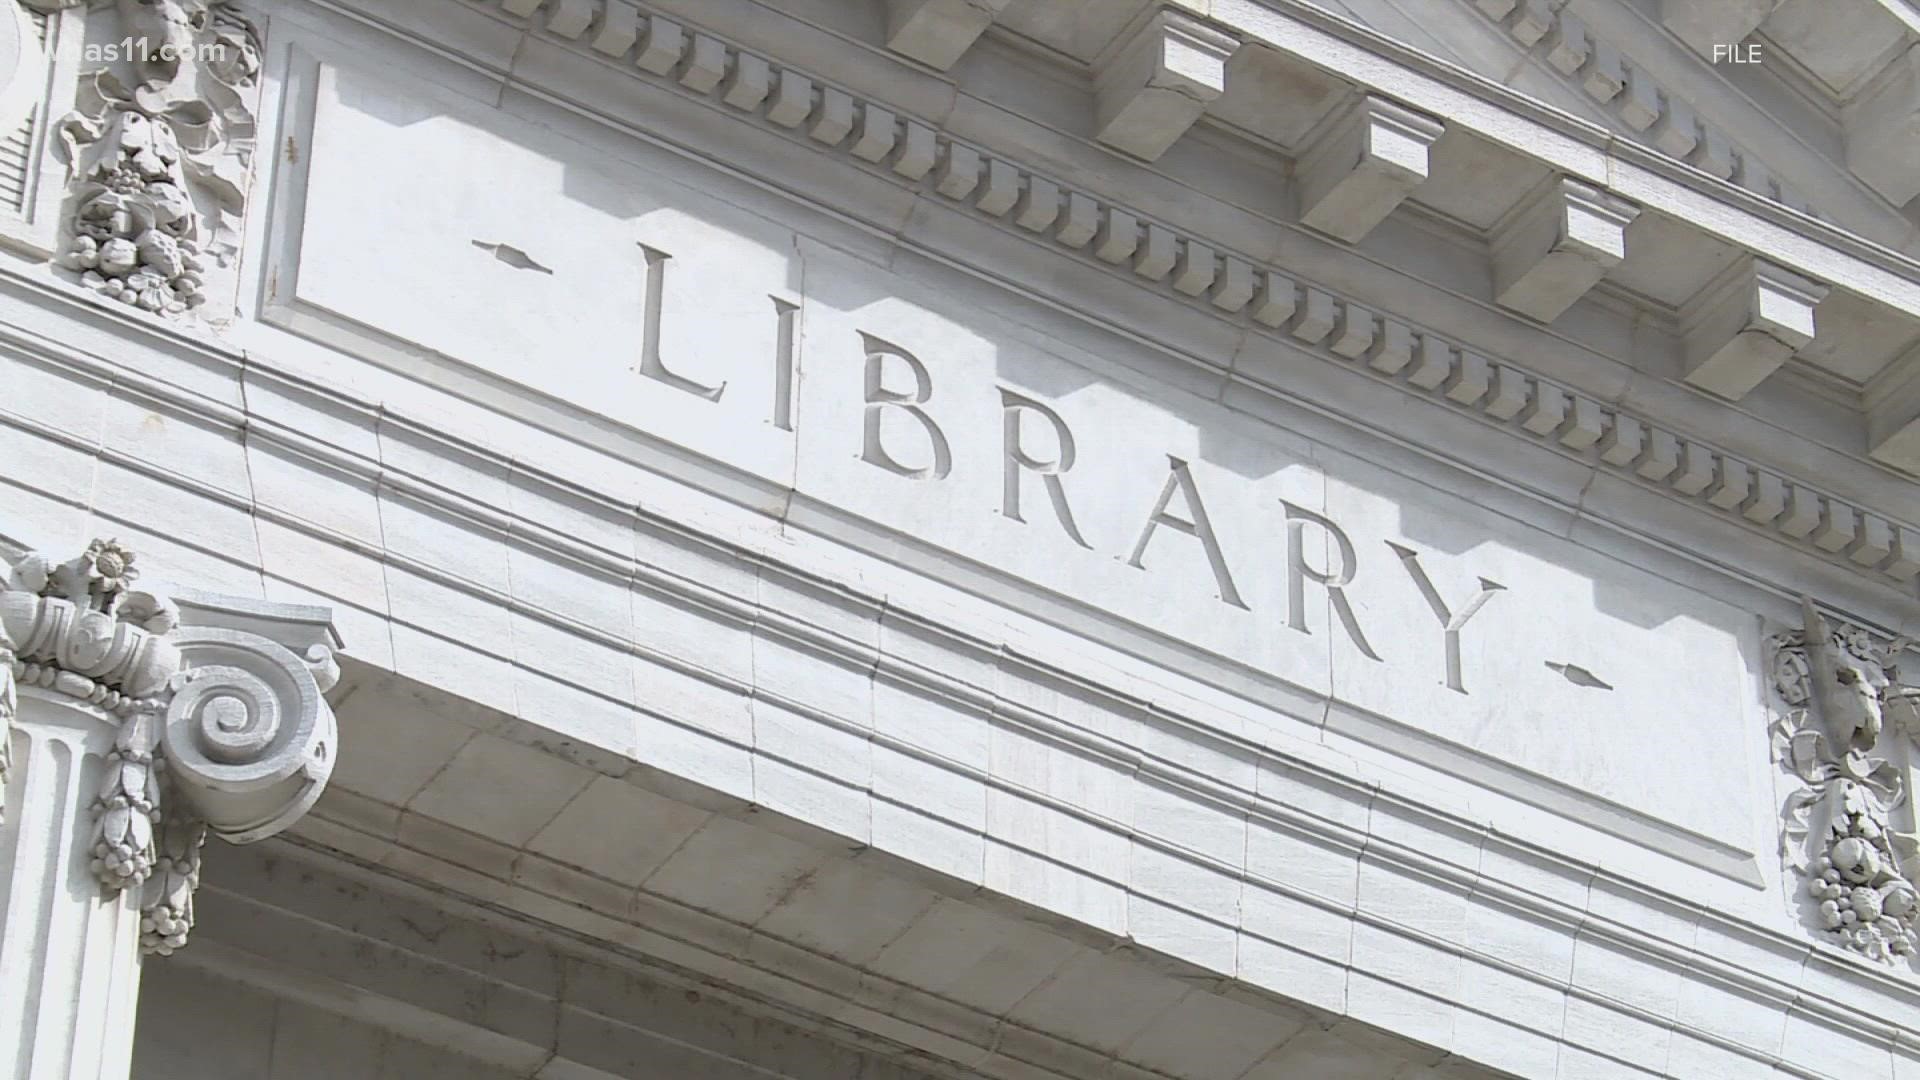 Library staff say they are going to try to move some programs to virtual, but others will just have to be rescheduled or canceled.